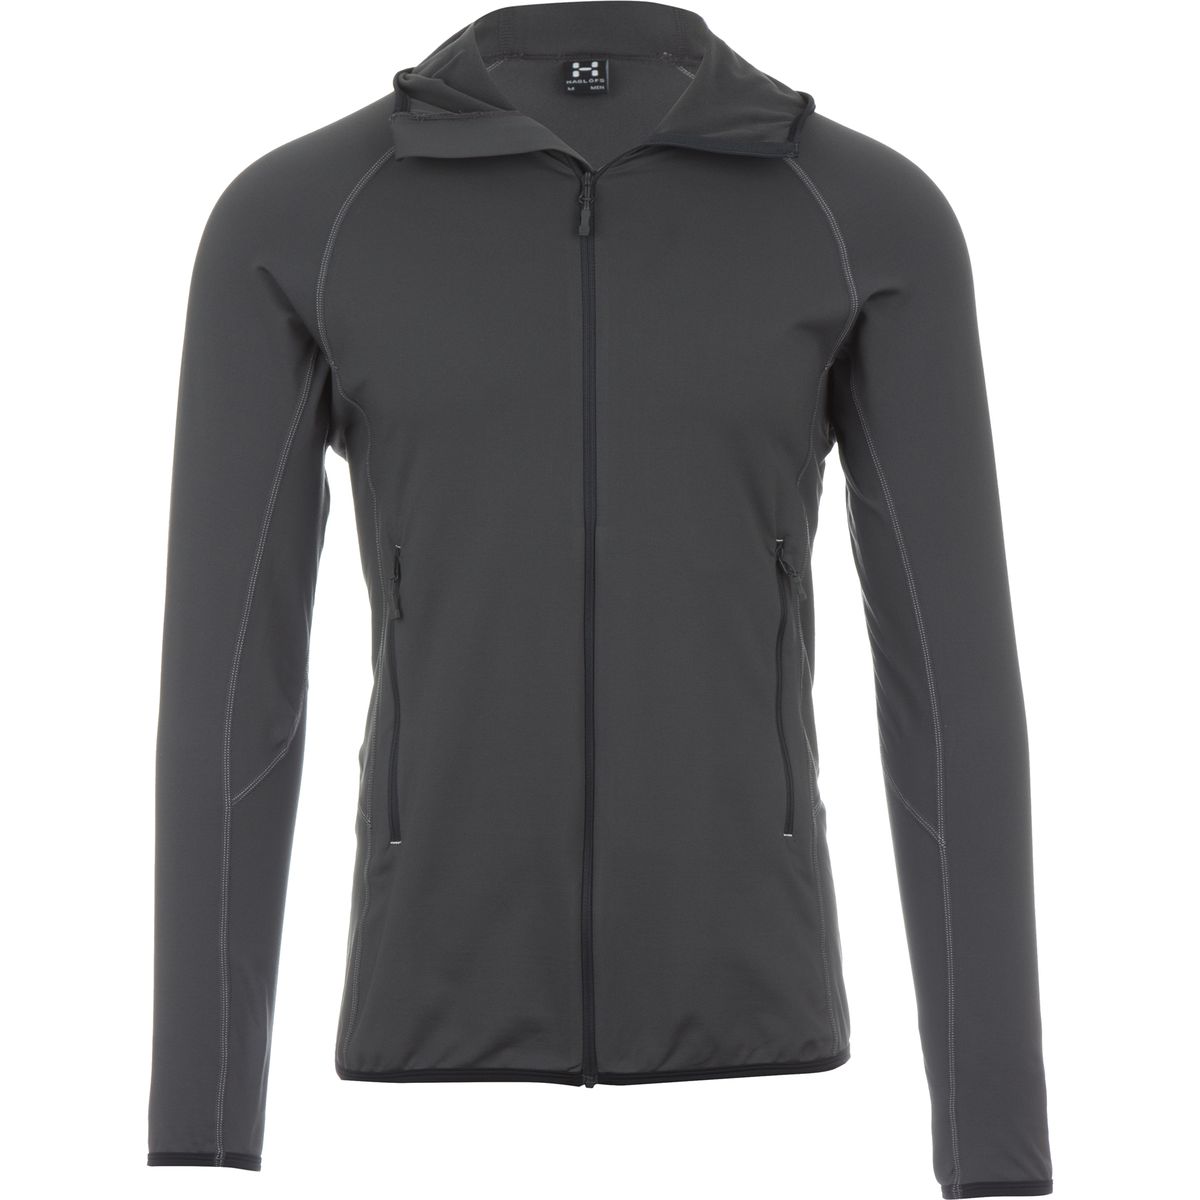 Fleece Jackets - The Insulating Layer - Mid Layer